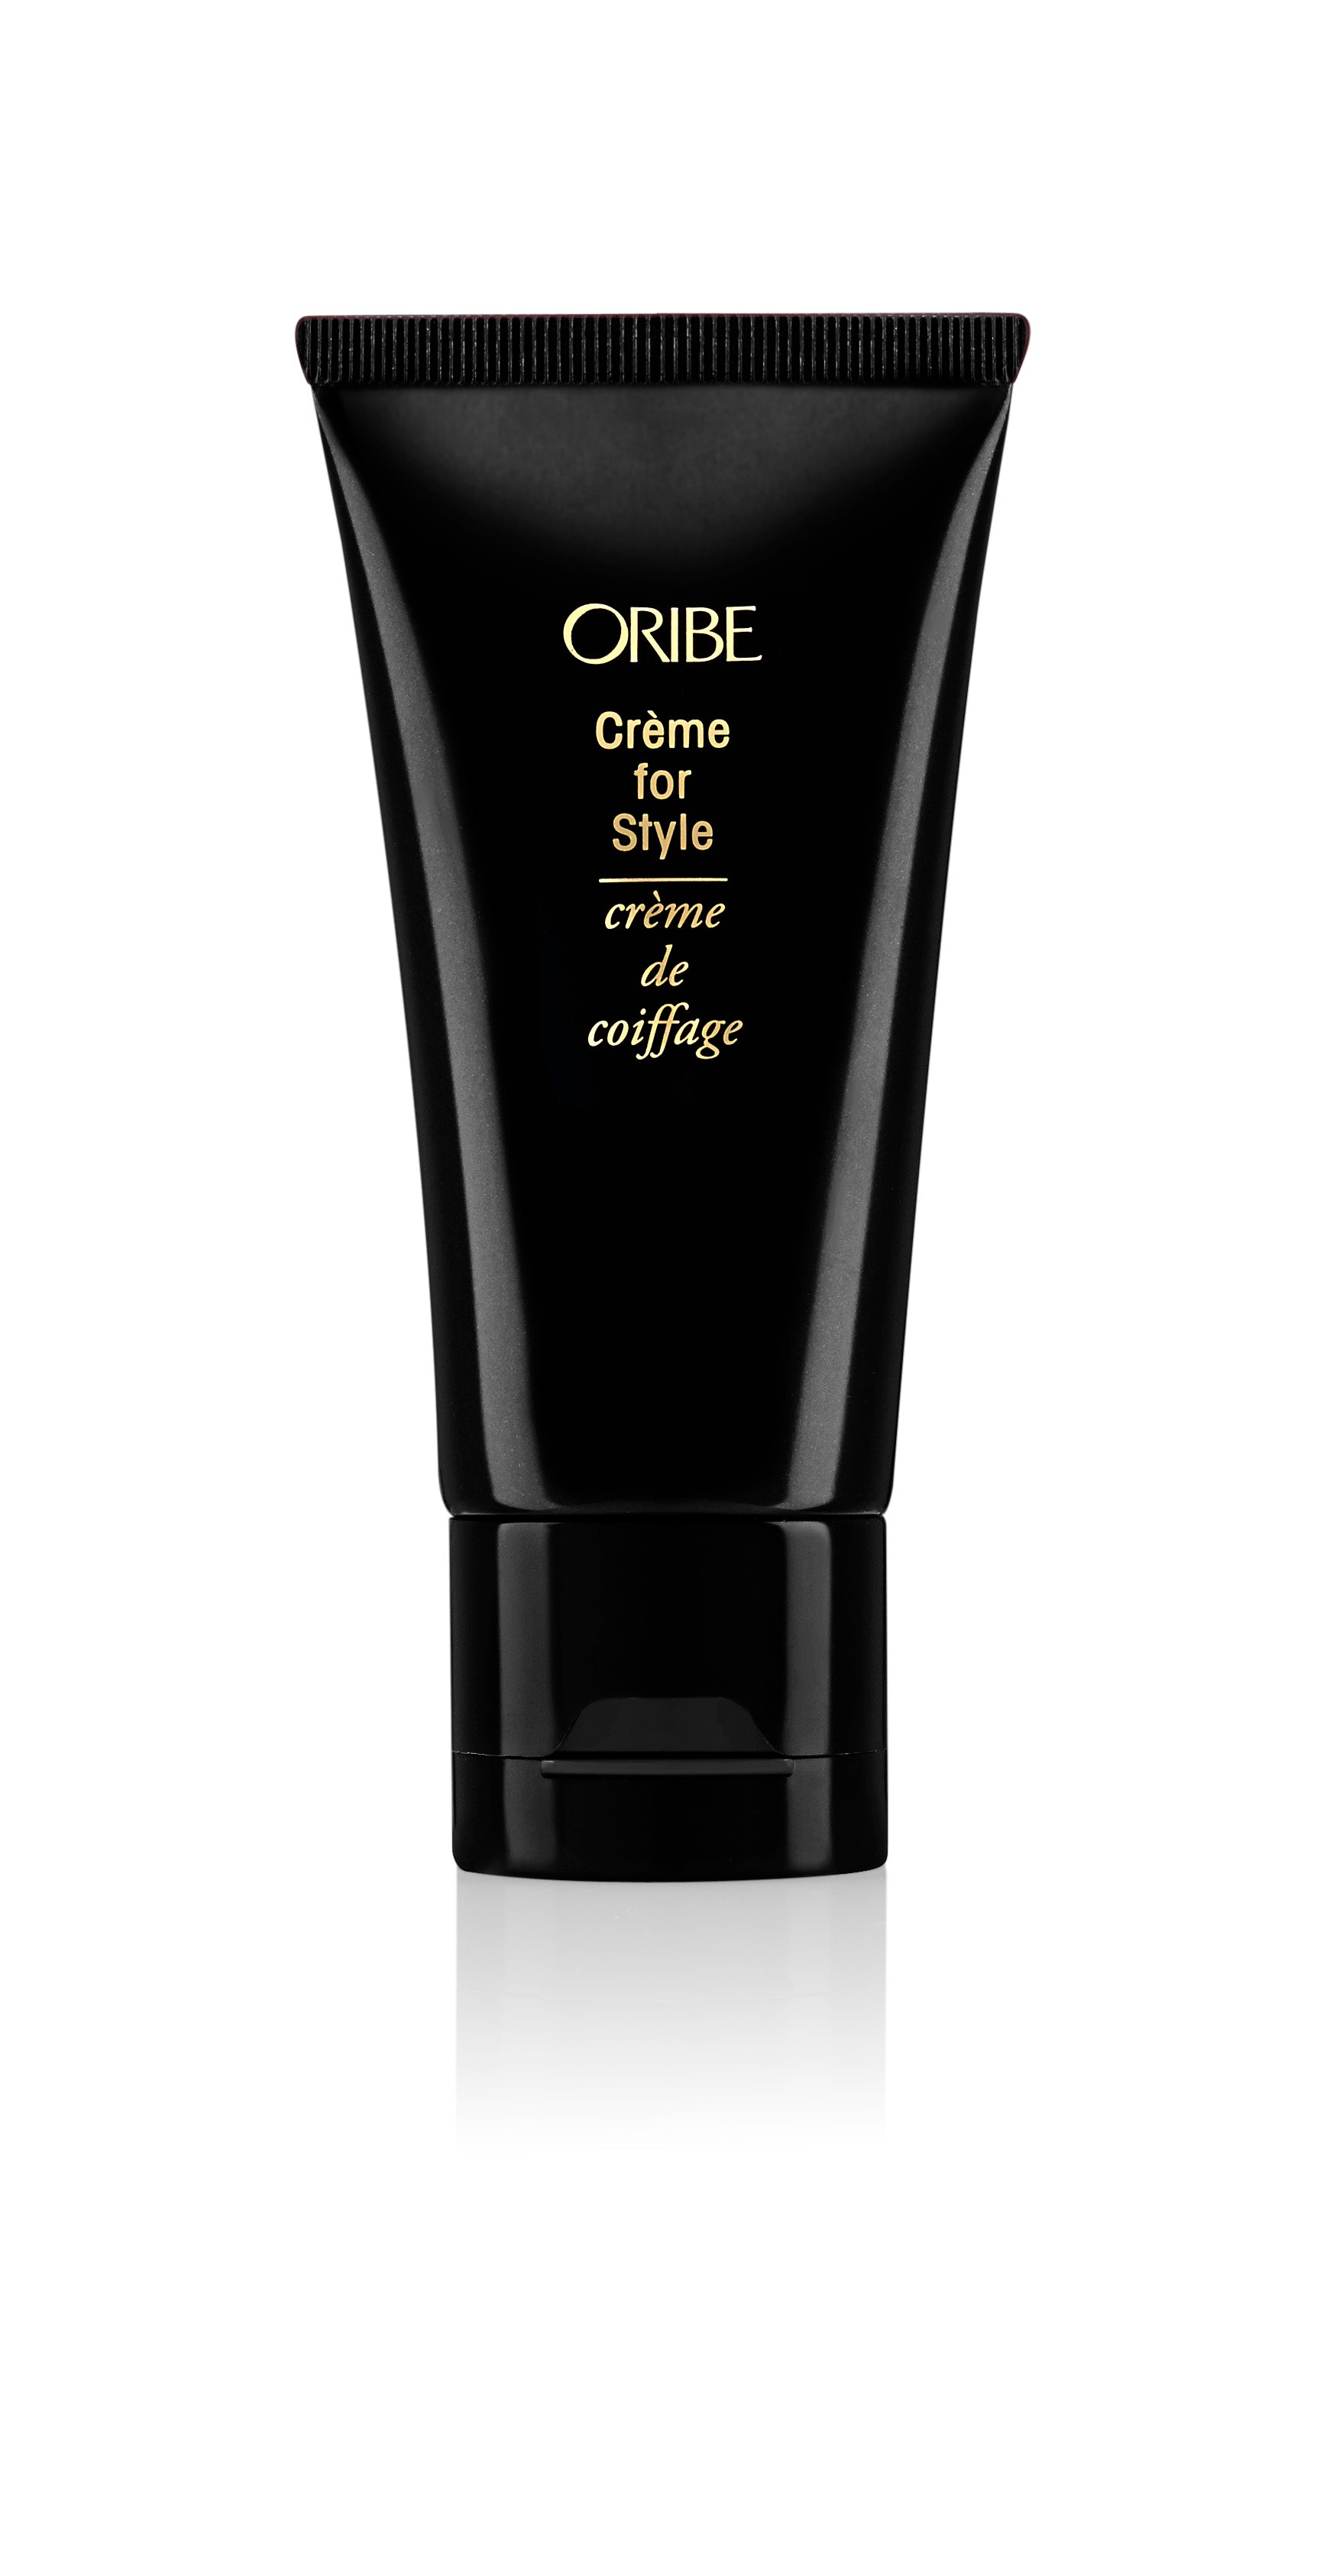 Crème for Style by Oribe